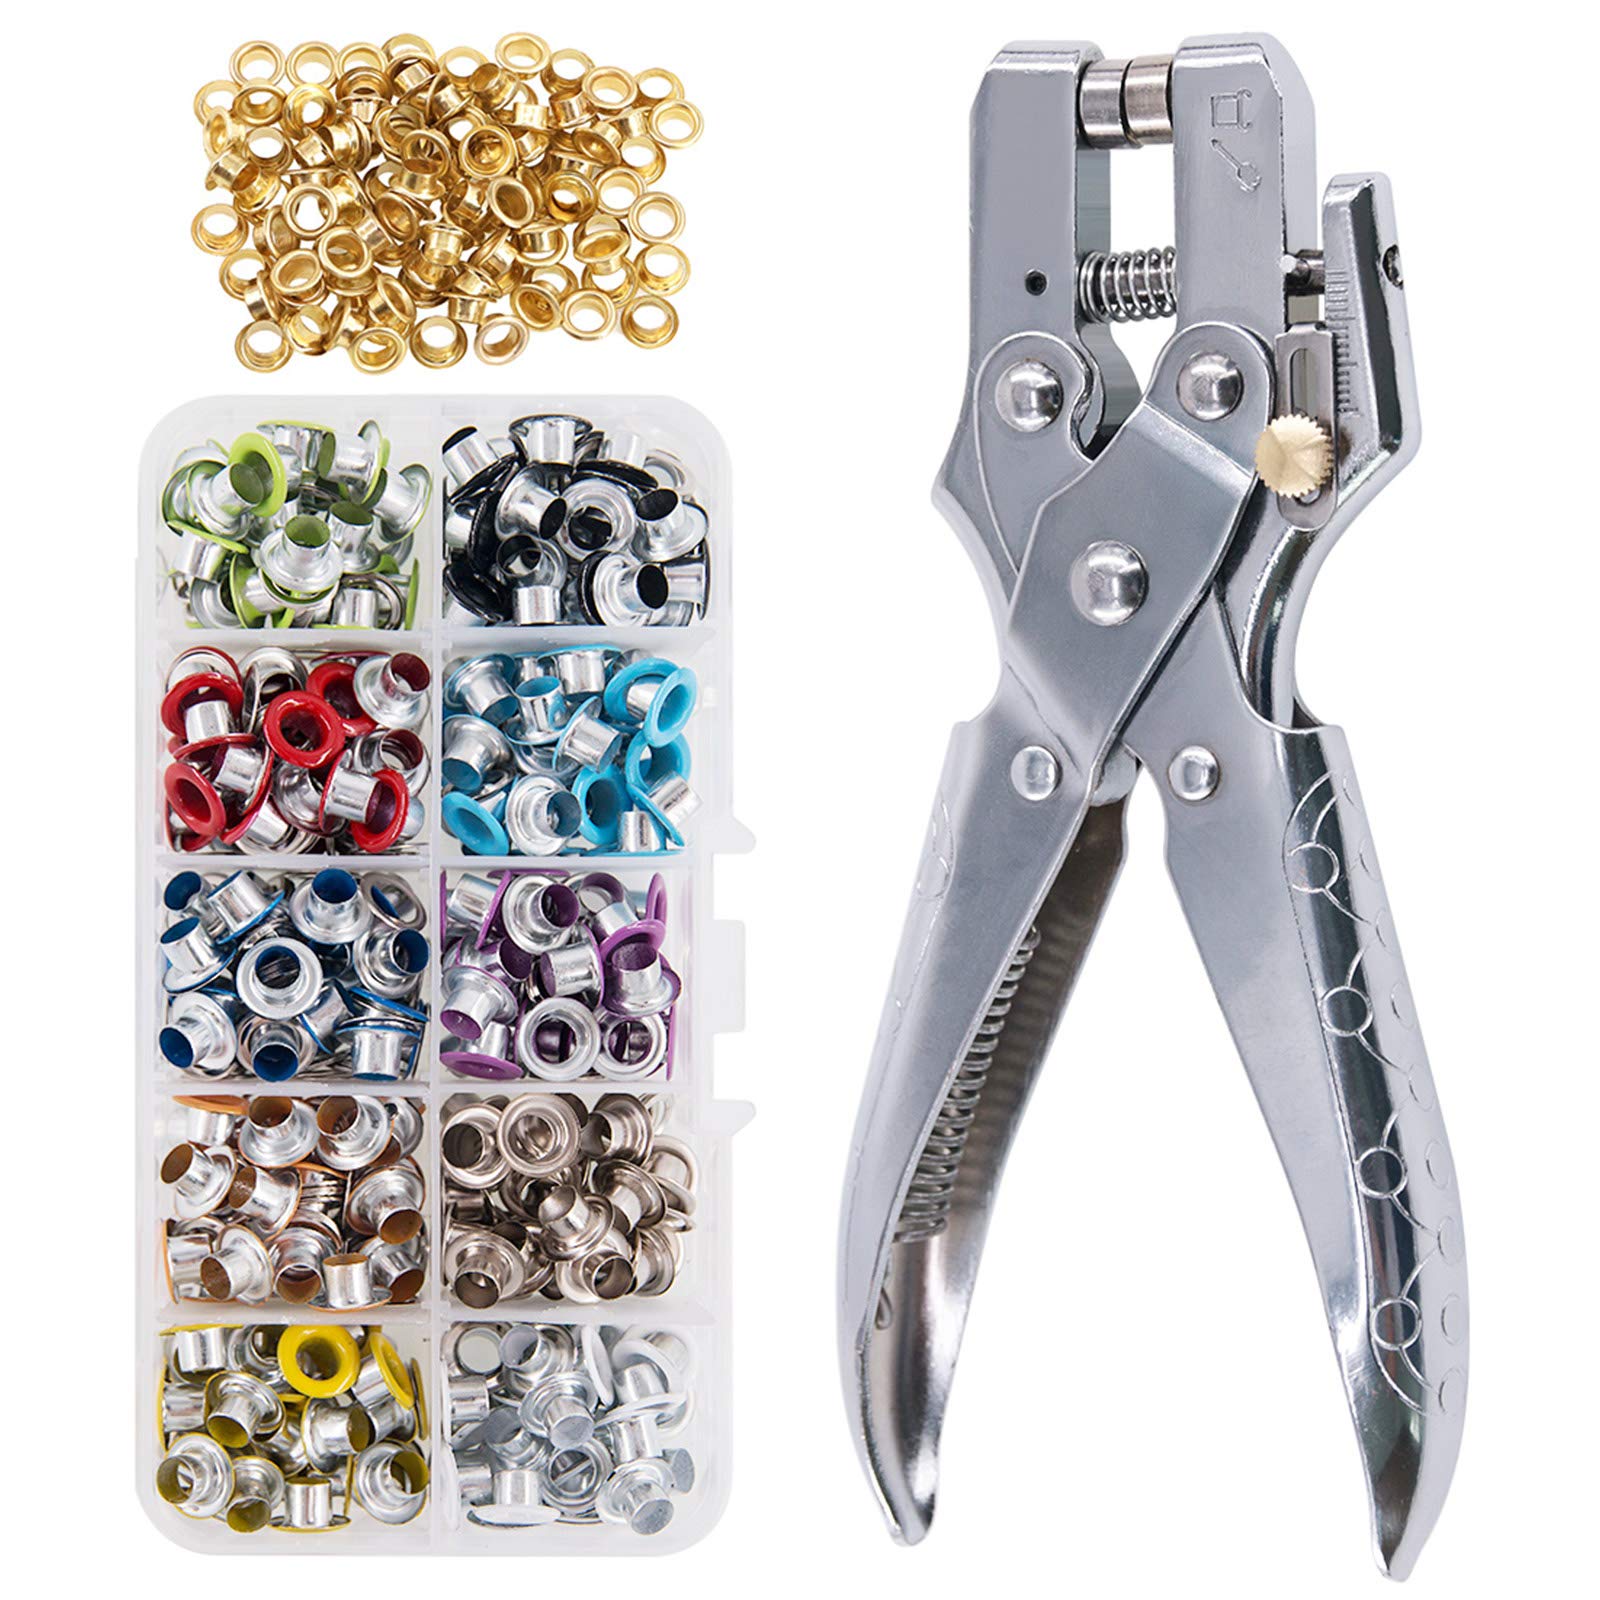 Keadic 300 Sets 1/5 inch Multi-Color Metal Eyelets Grommets Kit with Hole  Punch Plier and 100pcs Extra Gold Eyelets, for Leather, Canvas, All Fabrics  Clothes, Shoes, Belts, Bags, Crafts (11 Colors)